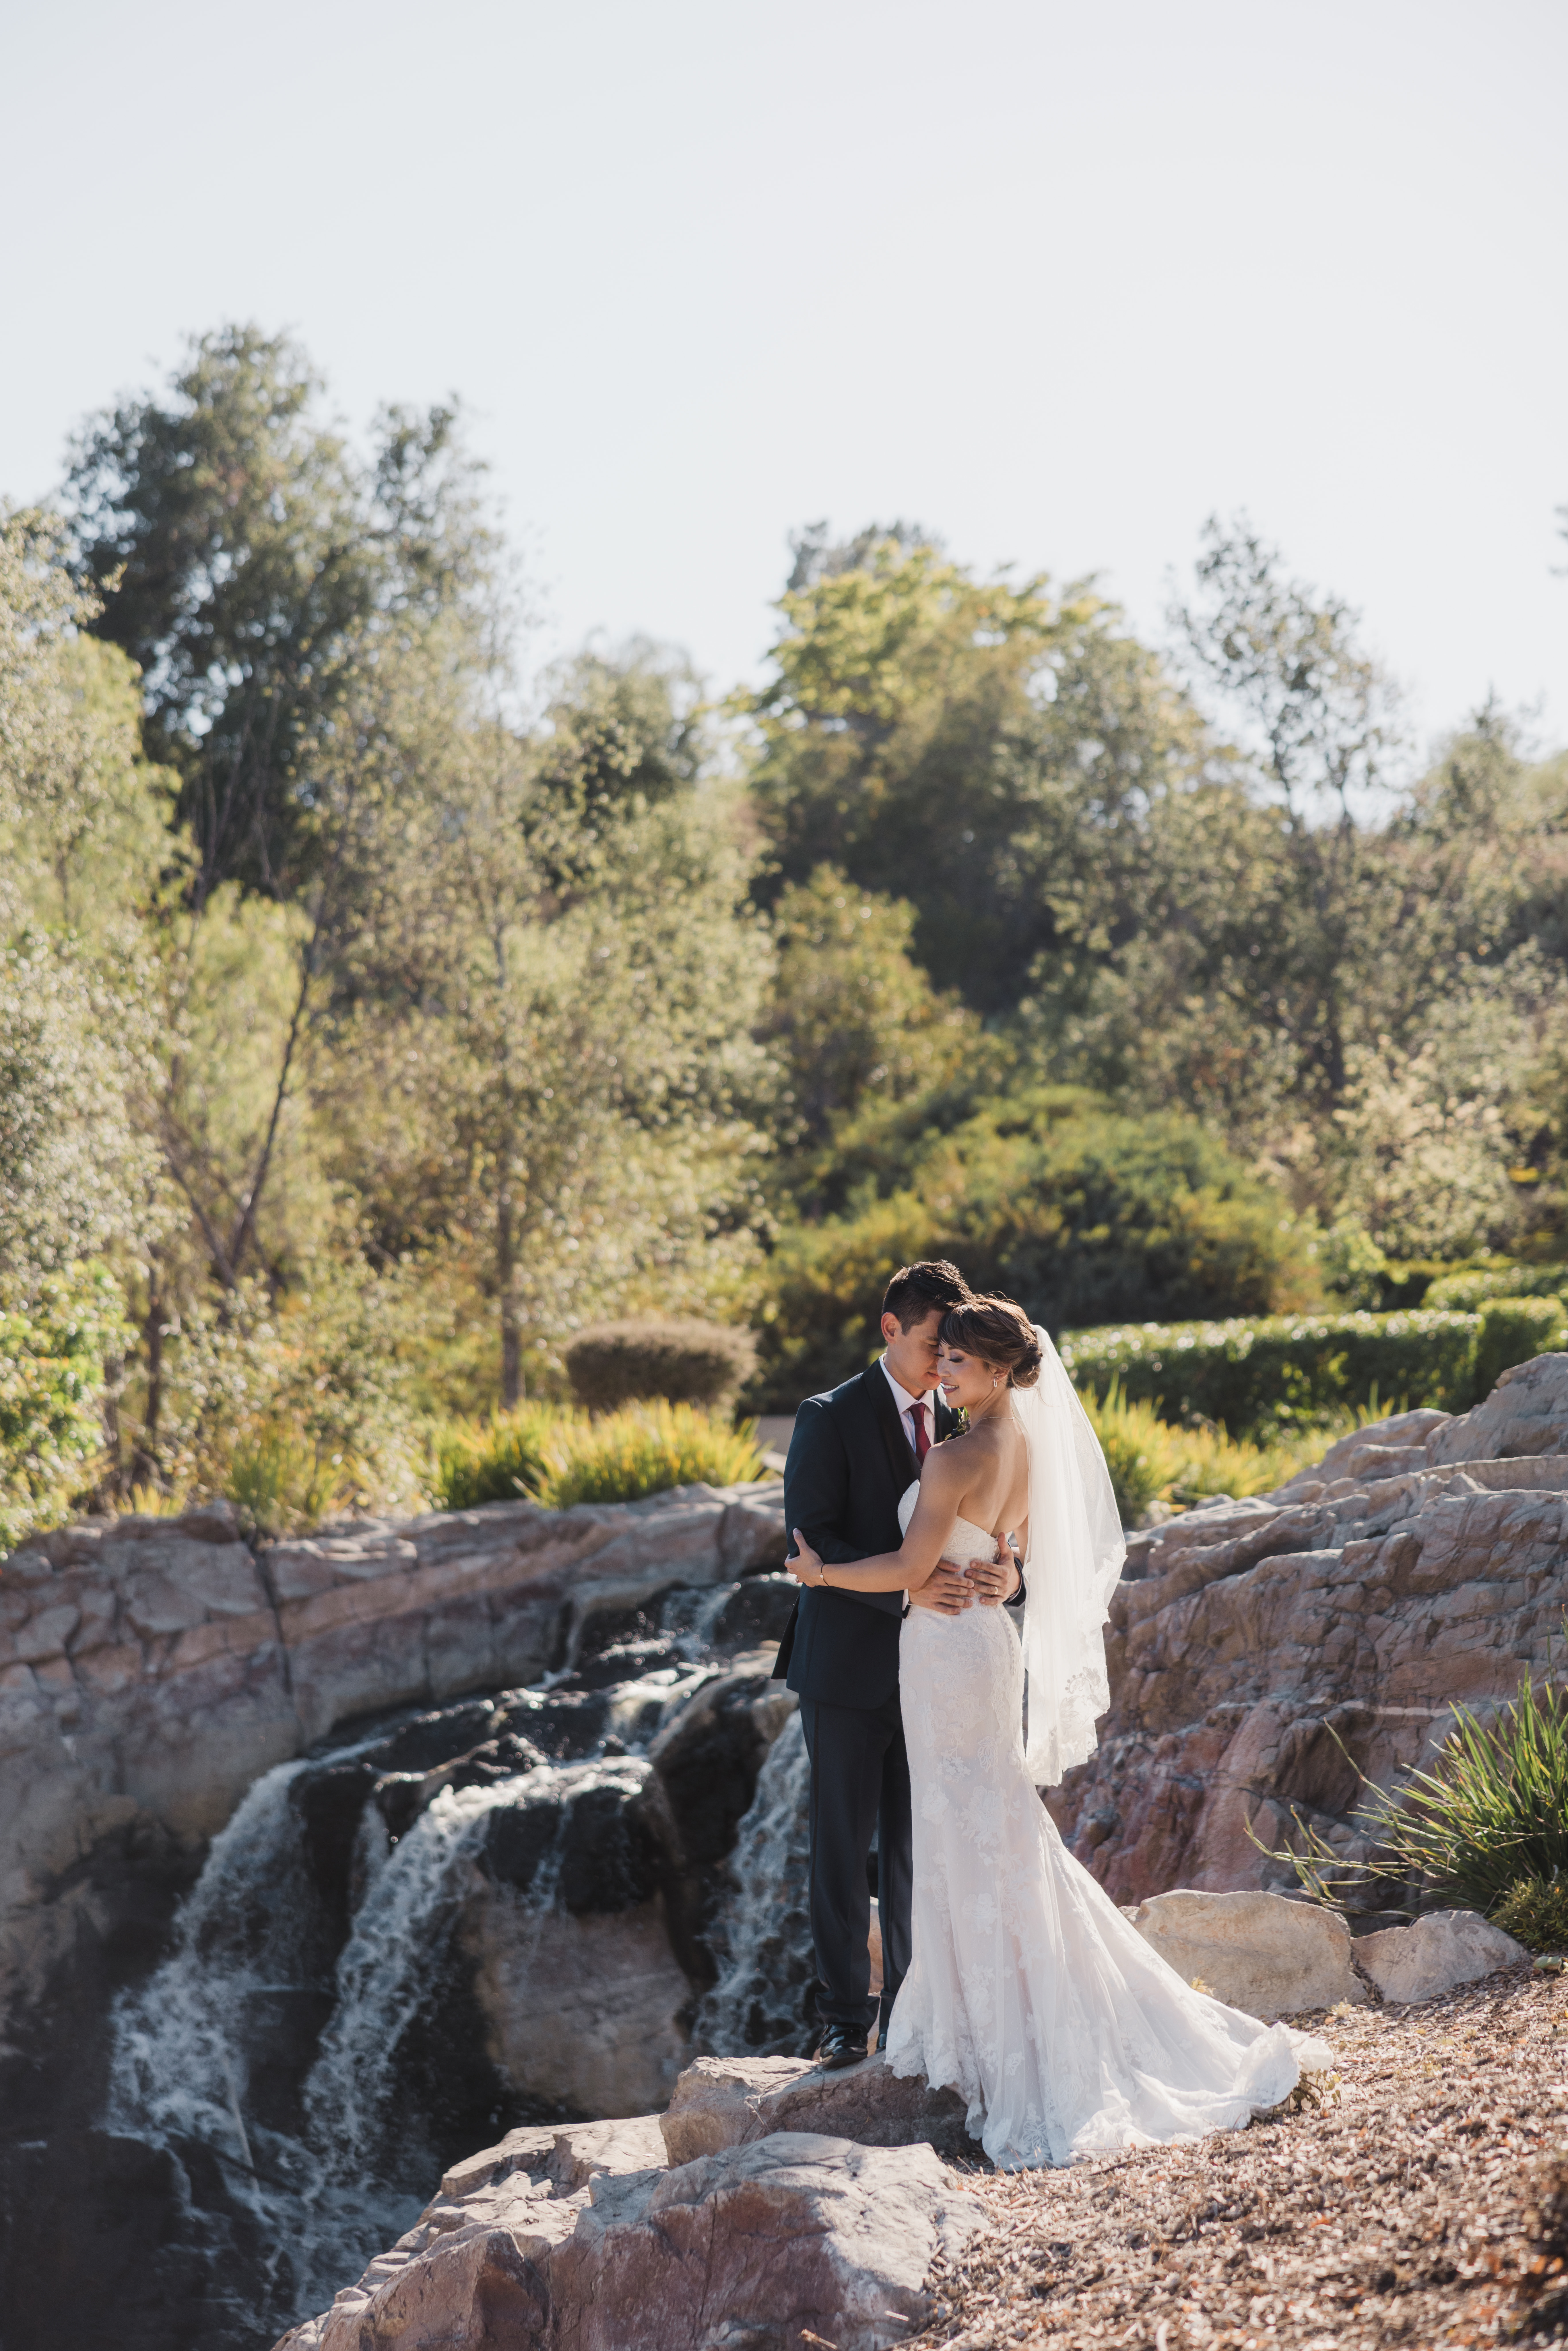 bride in strapless lace wedding dress and groom in navy tuxedo take outdoor portrait photos by waterfall at Dove Canyon Golf Club